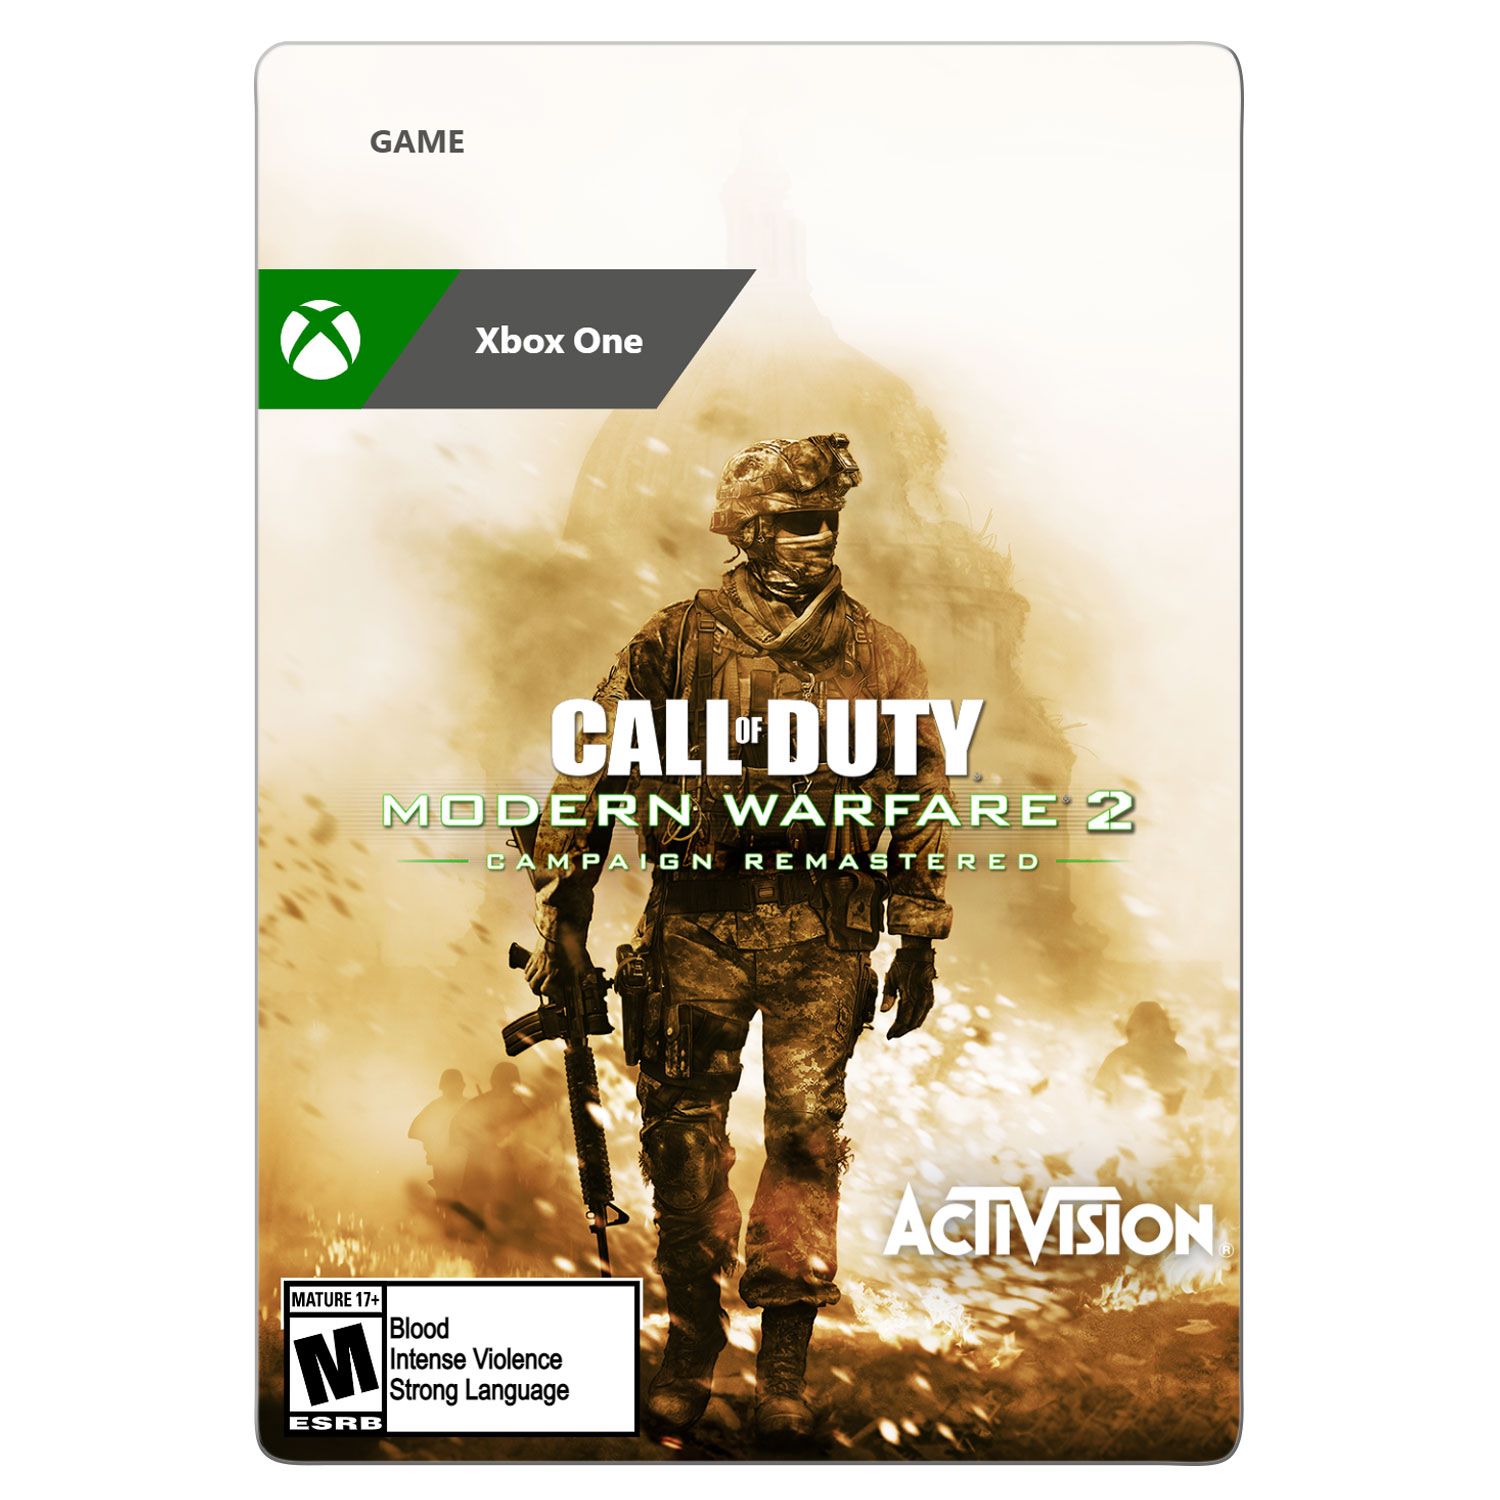 Call of Duty: Modern Warfare 2 Campaign Remastered - Xbox One [Digital] - image 1 of 2